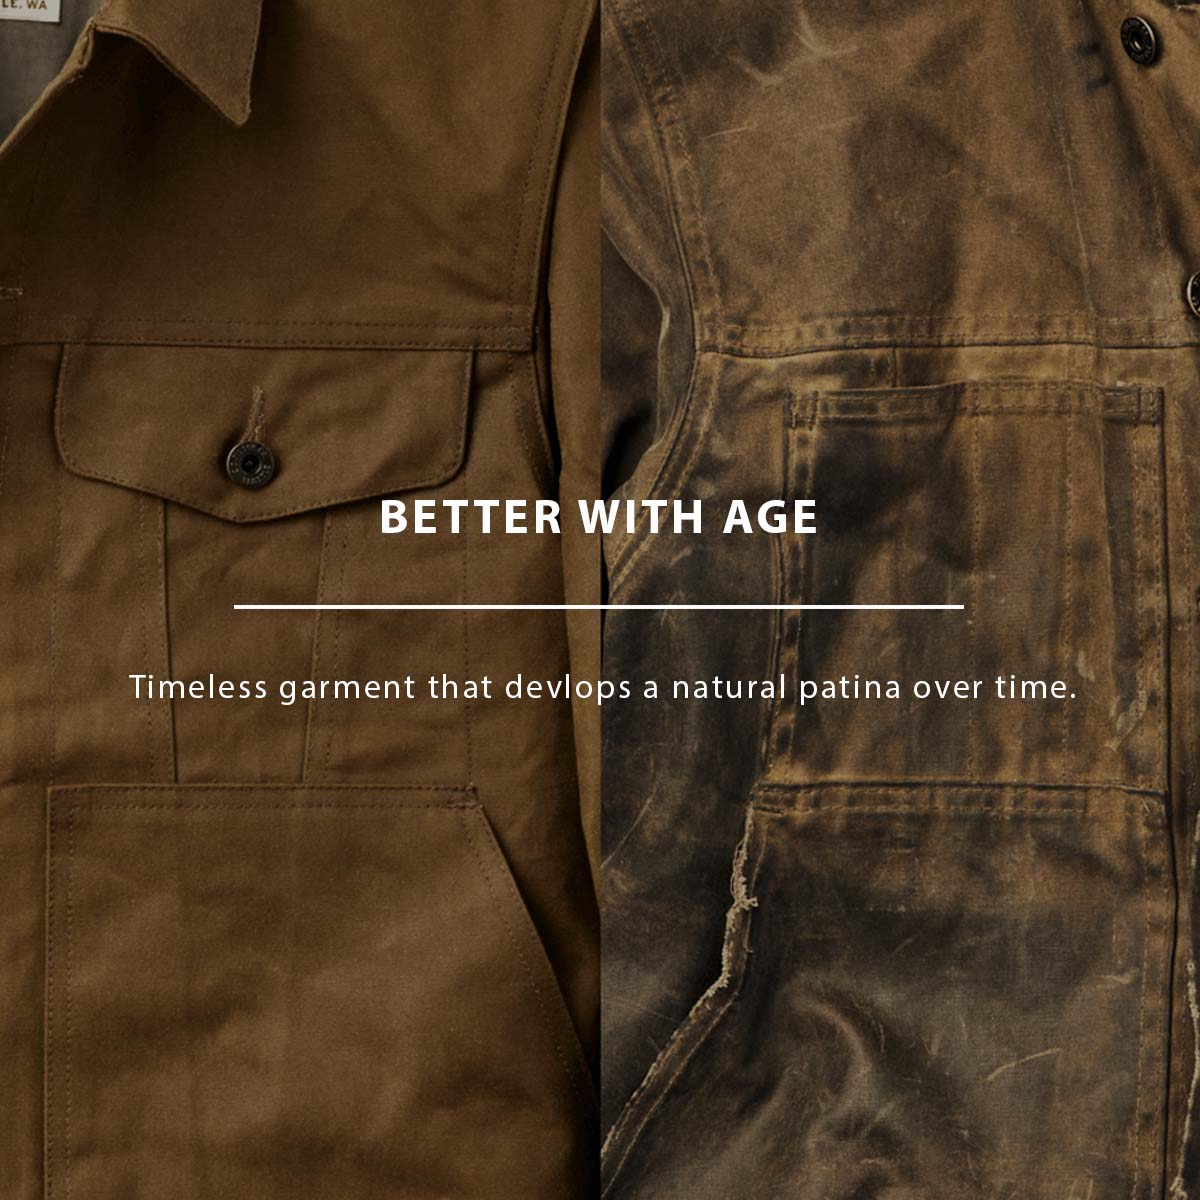 Filson Short Lined Cruiser Jacket, better with age.